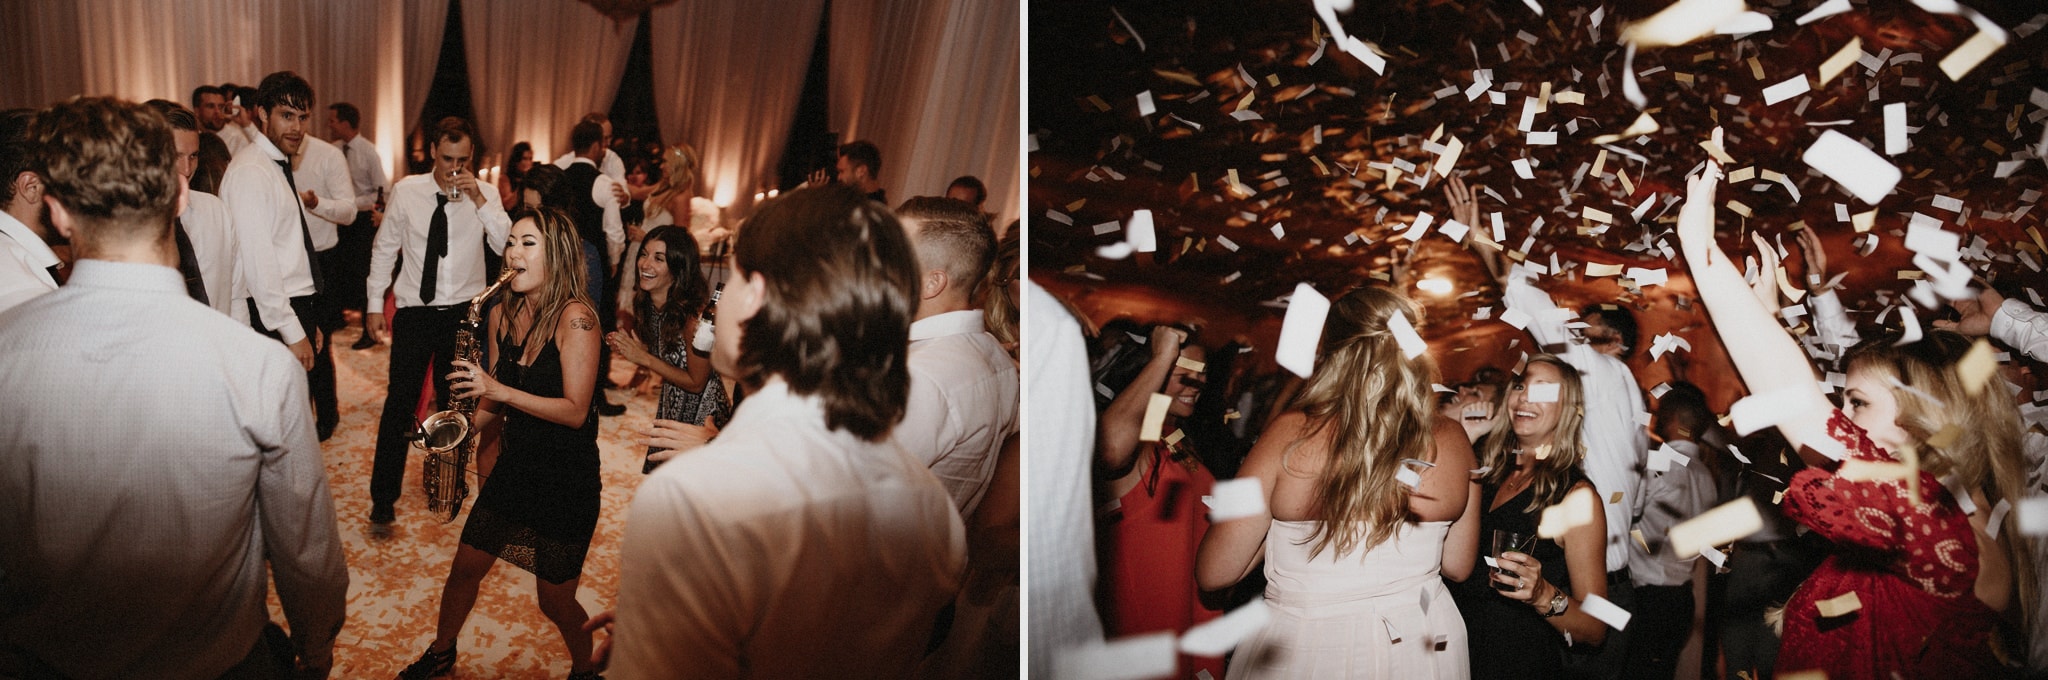 A saxophonist plays in the middle of the dance floor during a fun wedding at Pelican Hill Resort in California.